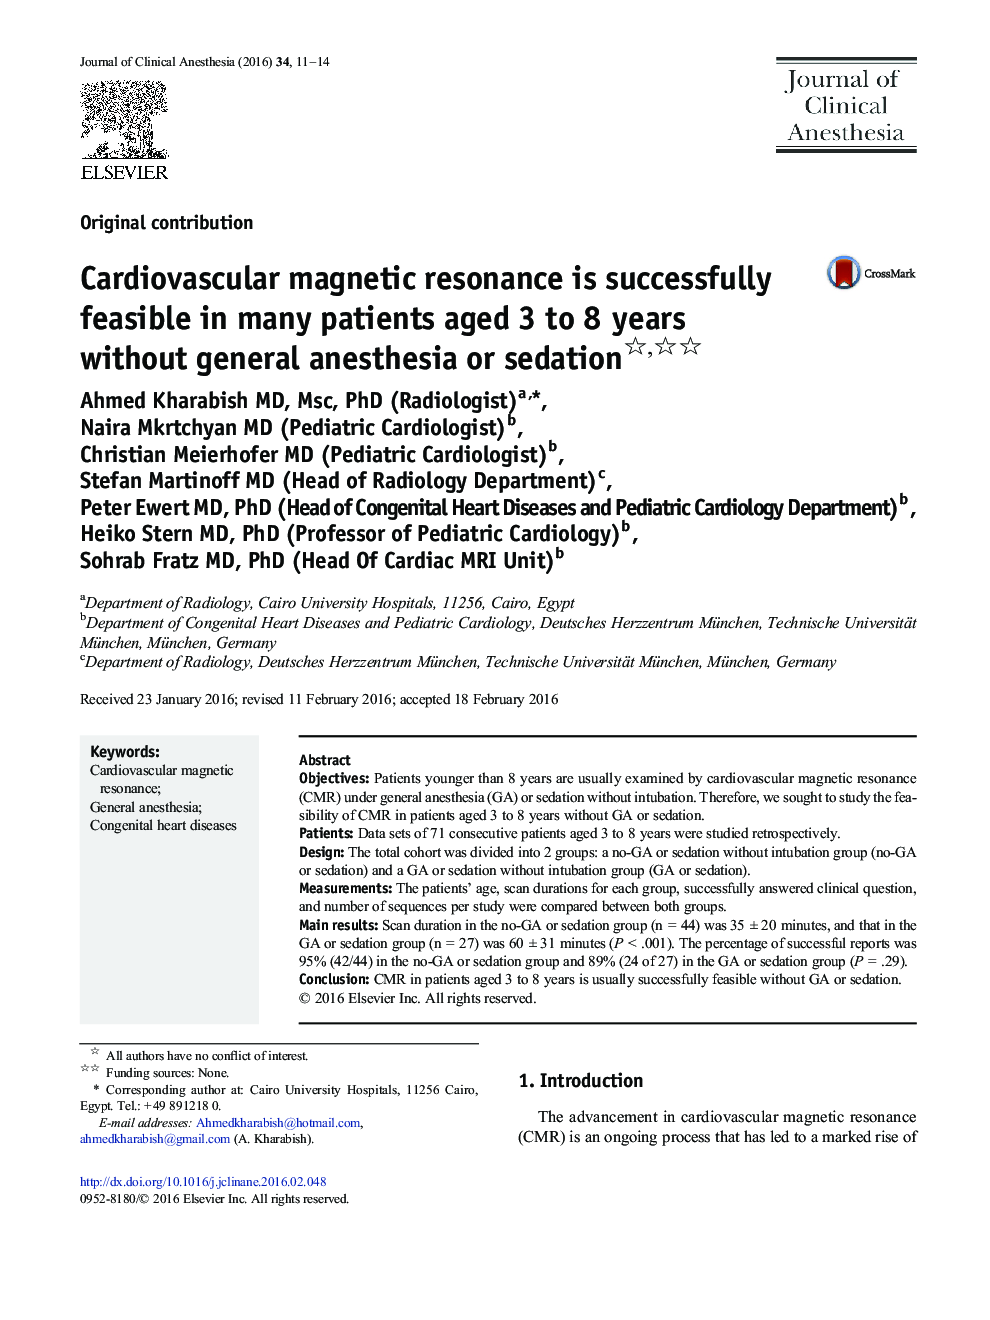 Cardiovascular magnetic resonance is successfully feasible in many patients aged 3 to 8Â years without general anesthesia or sedation